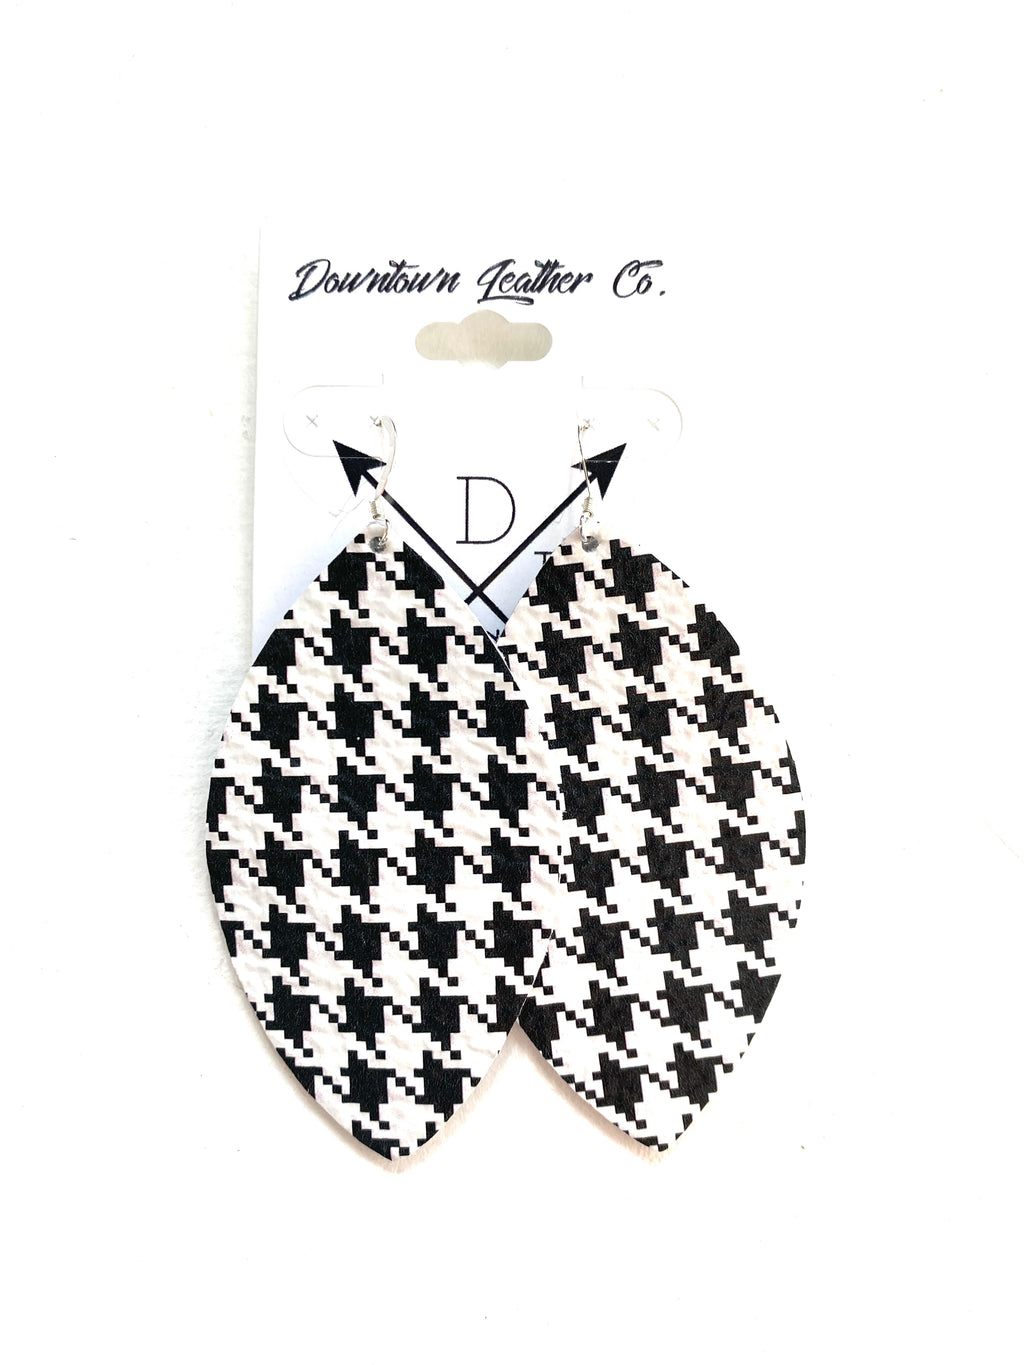 Surf's Up Black & White Houndstooth